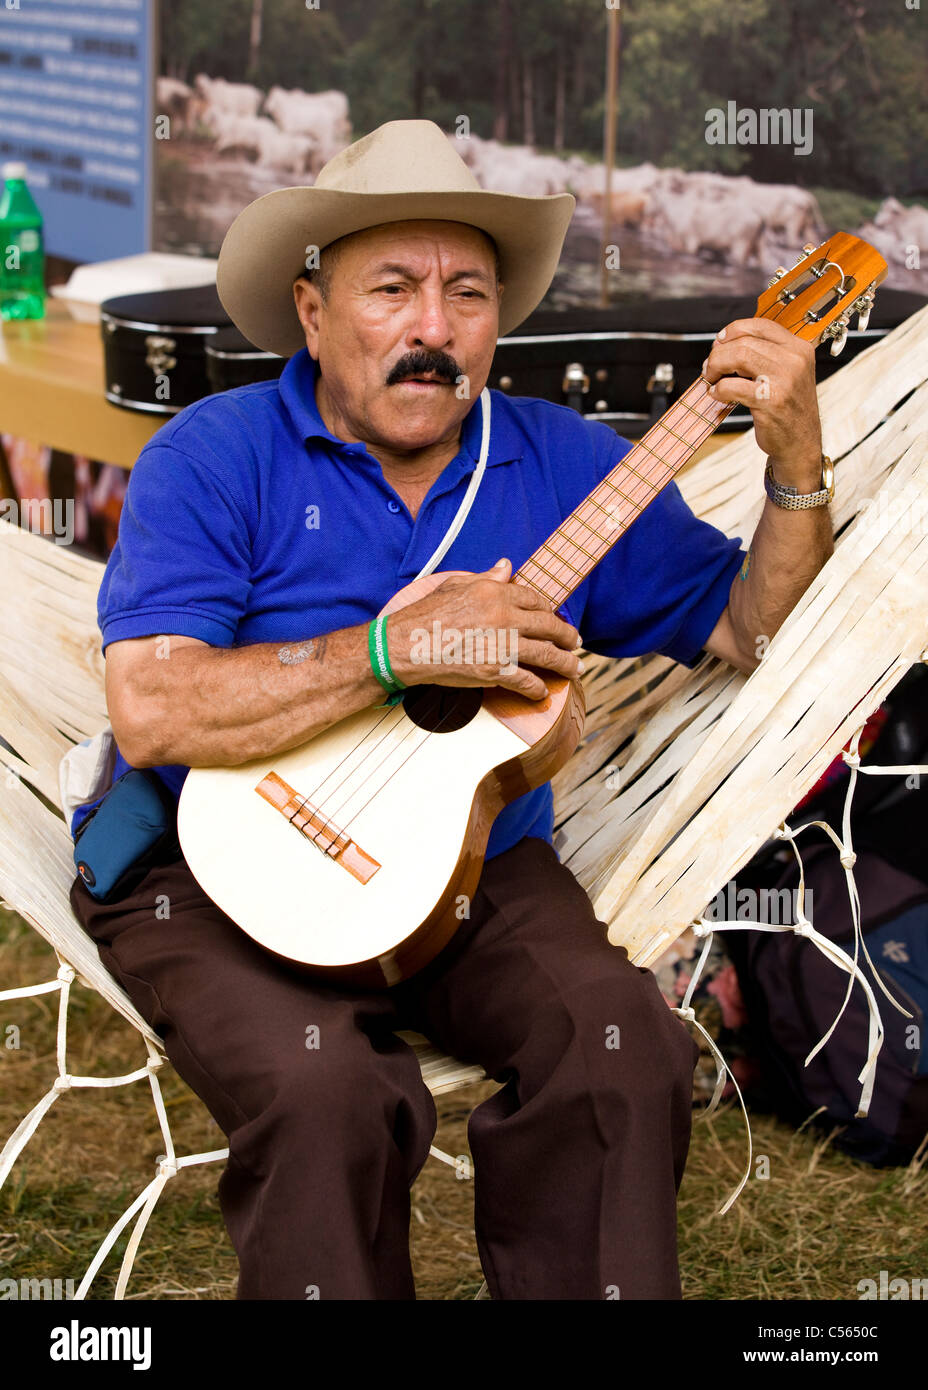 A South-American man wearing a cowboy hat strums a classical guitar Stock Photo